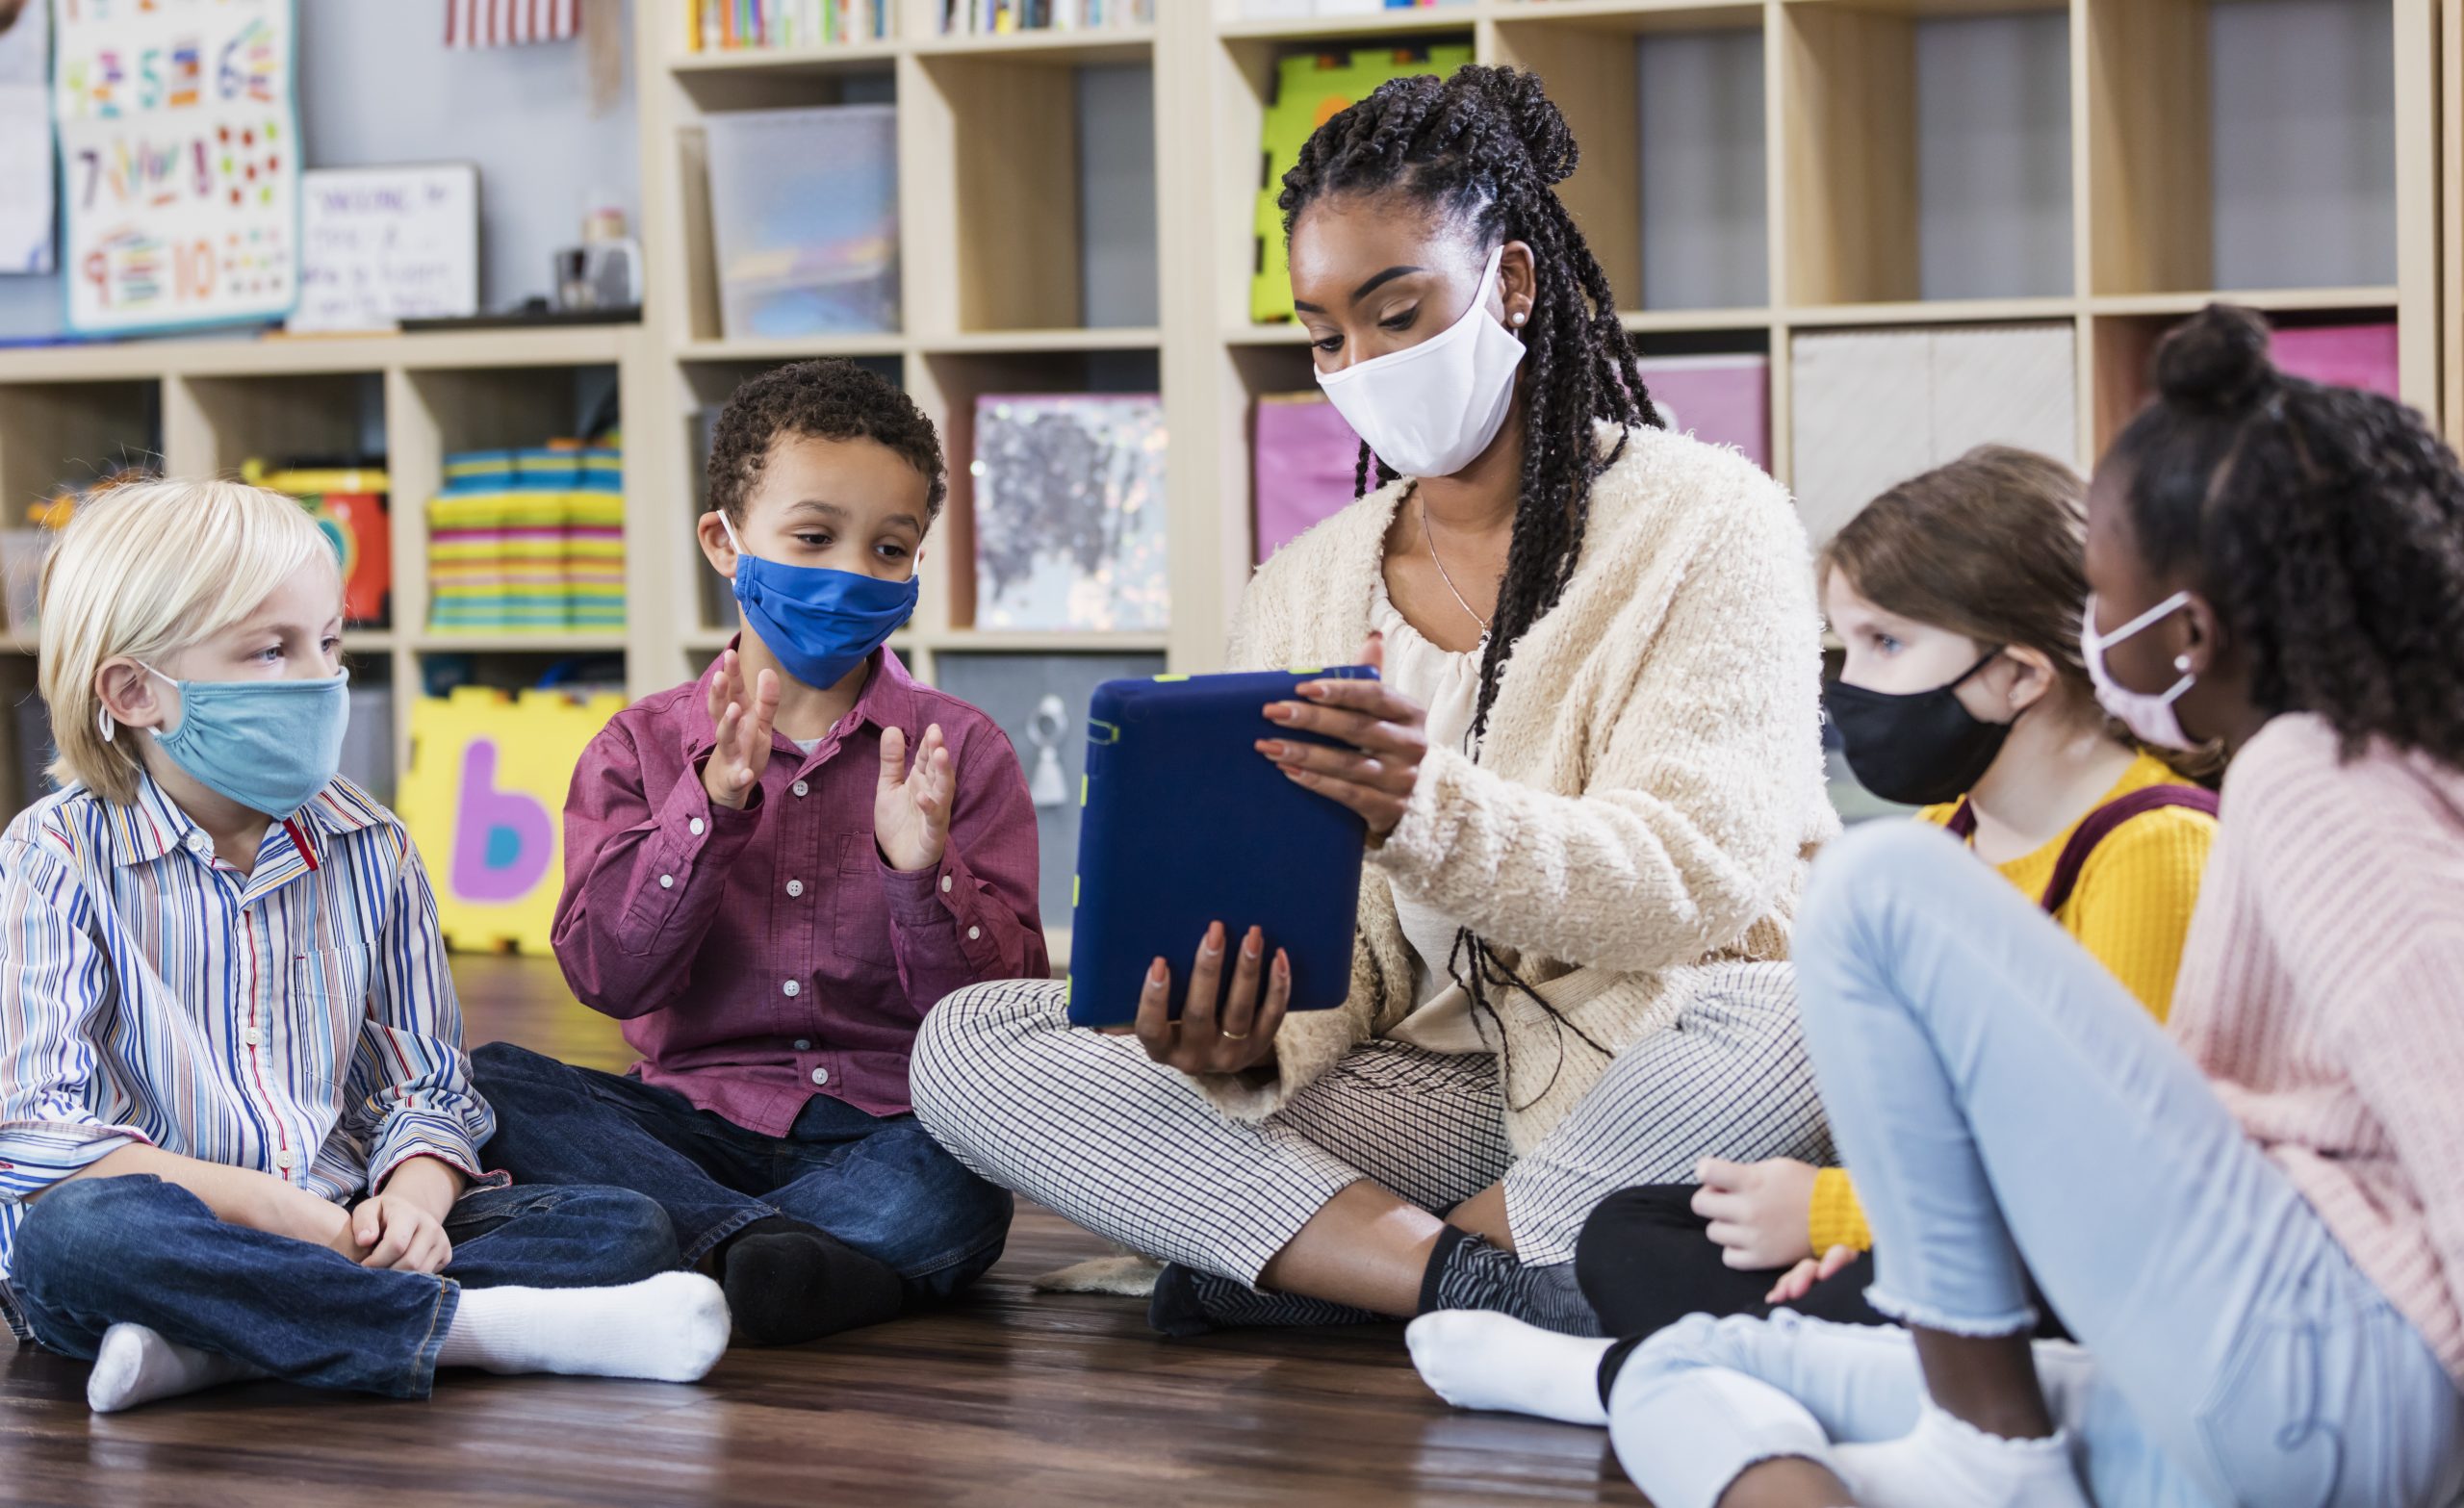 Black woman teacher sits cross-legged with diverse children in school classroom. All of them are wearing masks. The teacher shows one student something on a tablet.